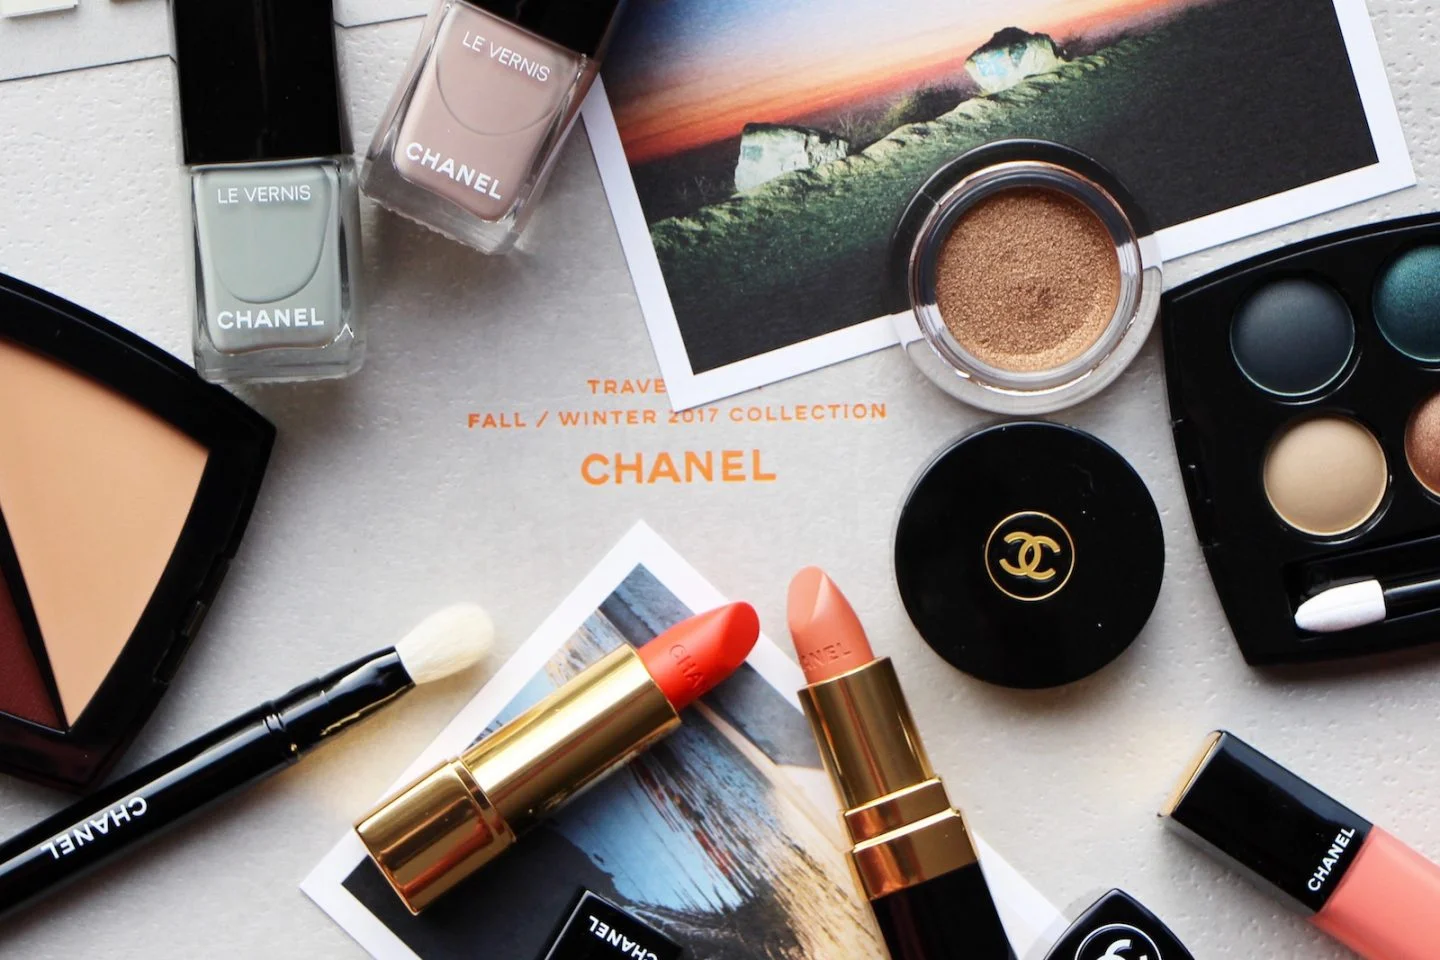 Chanel AW17 Makeup Collection Travel Diary